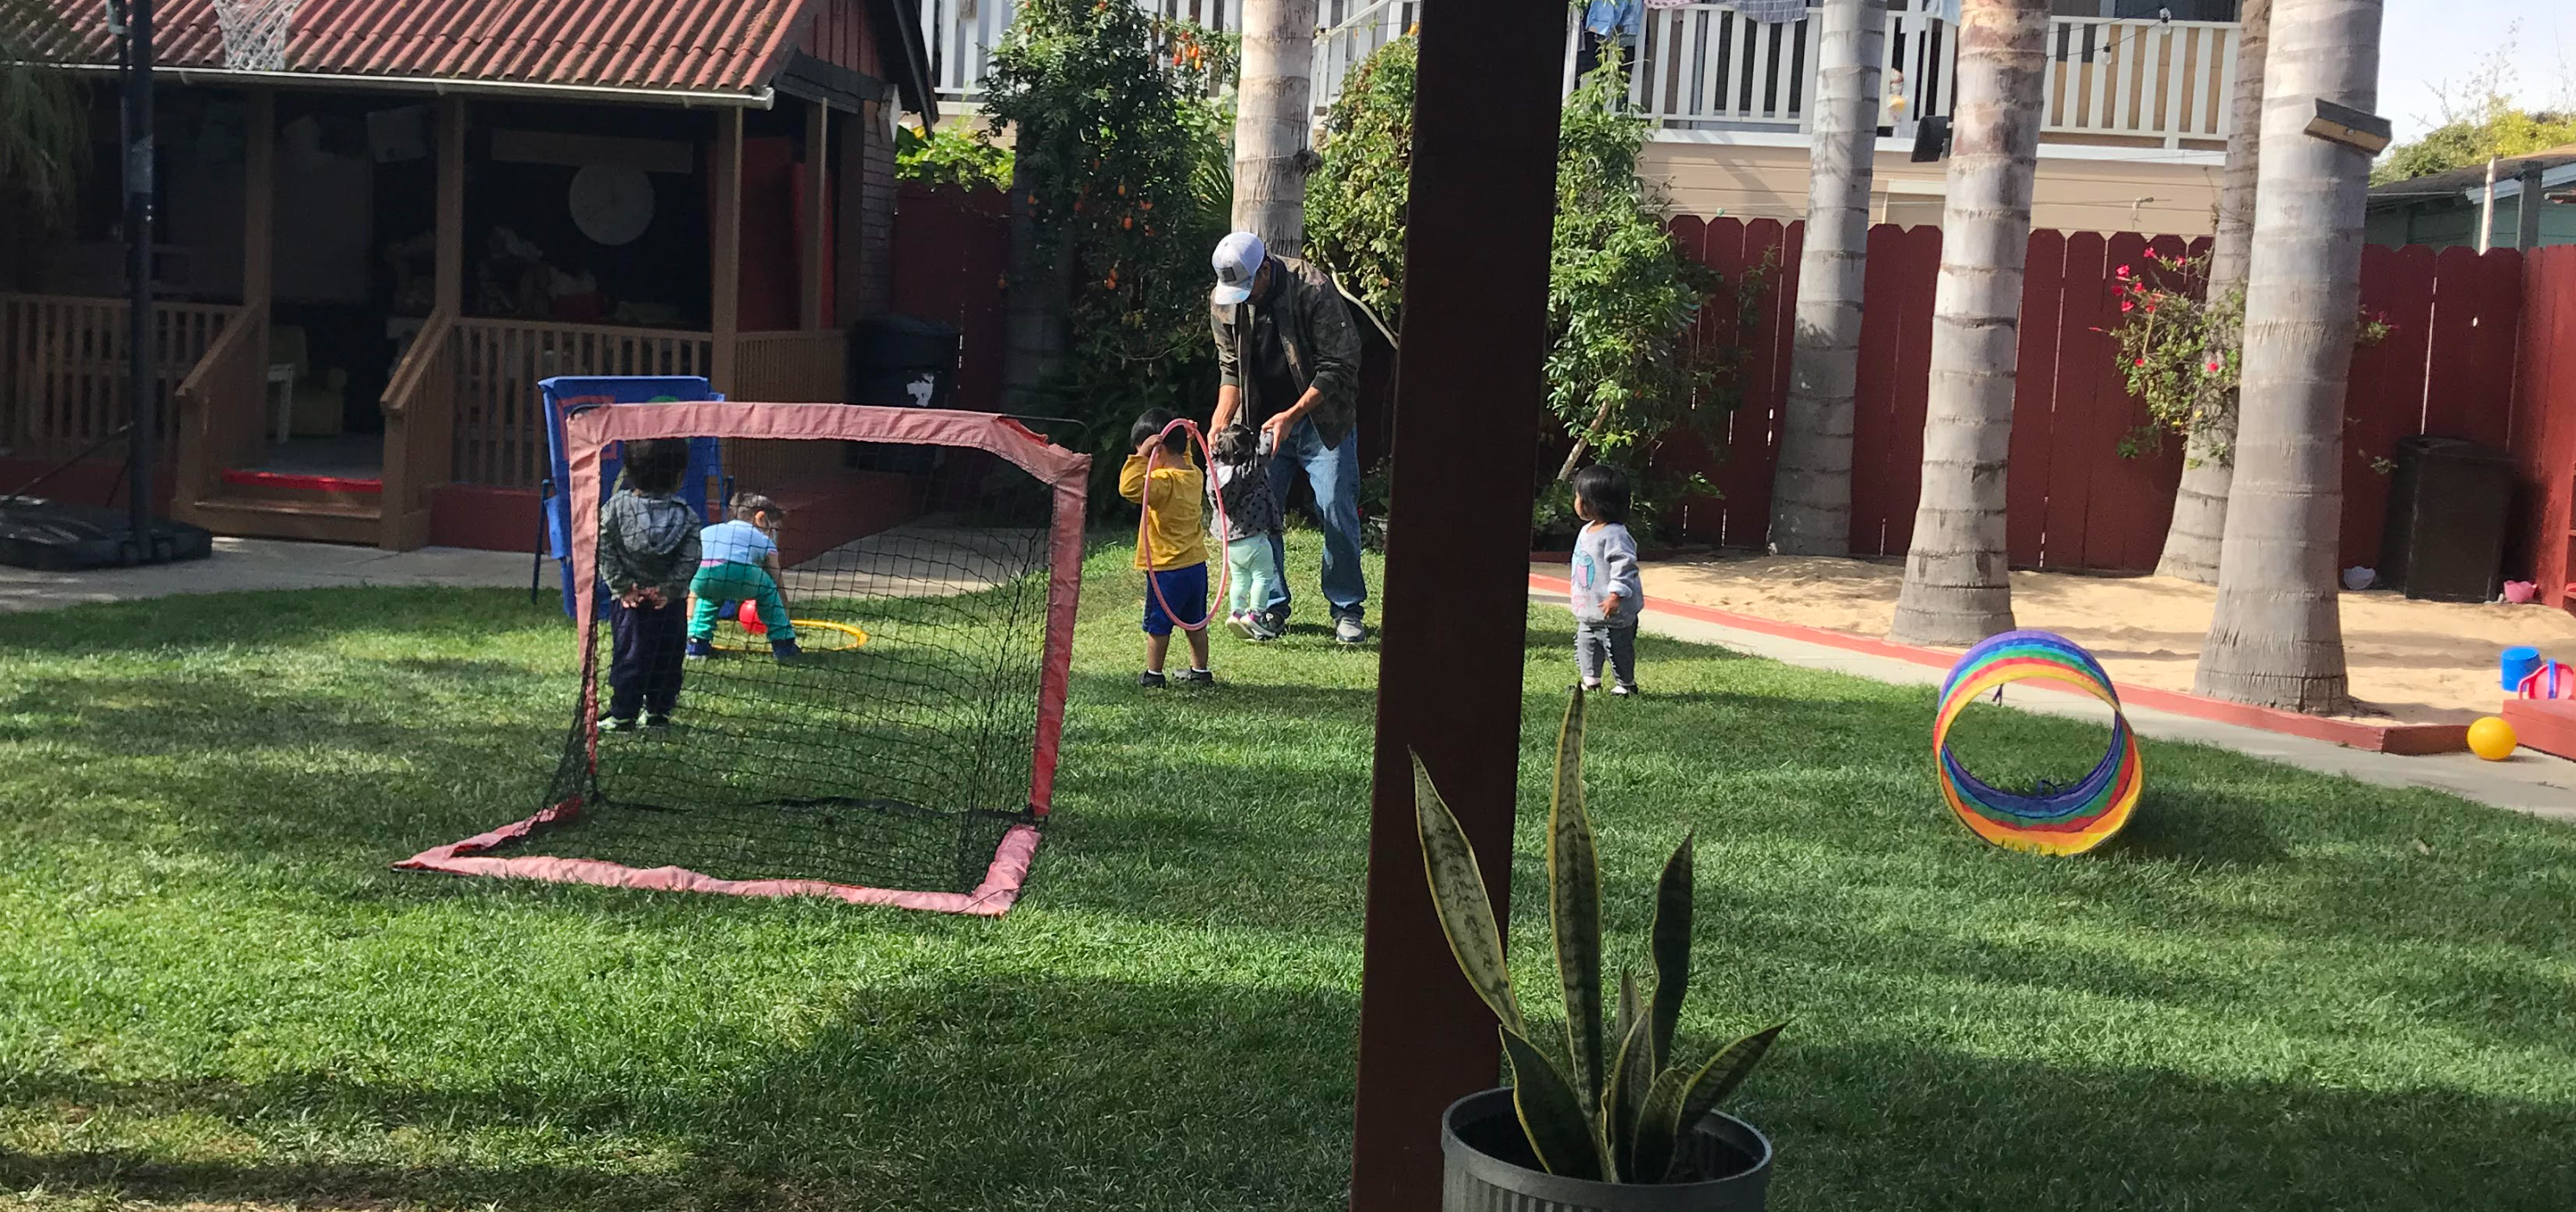 adult and children in backyard playing on the grass